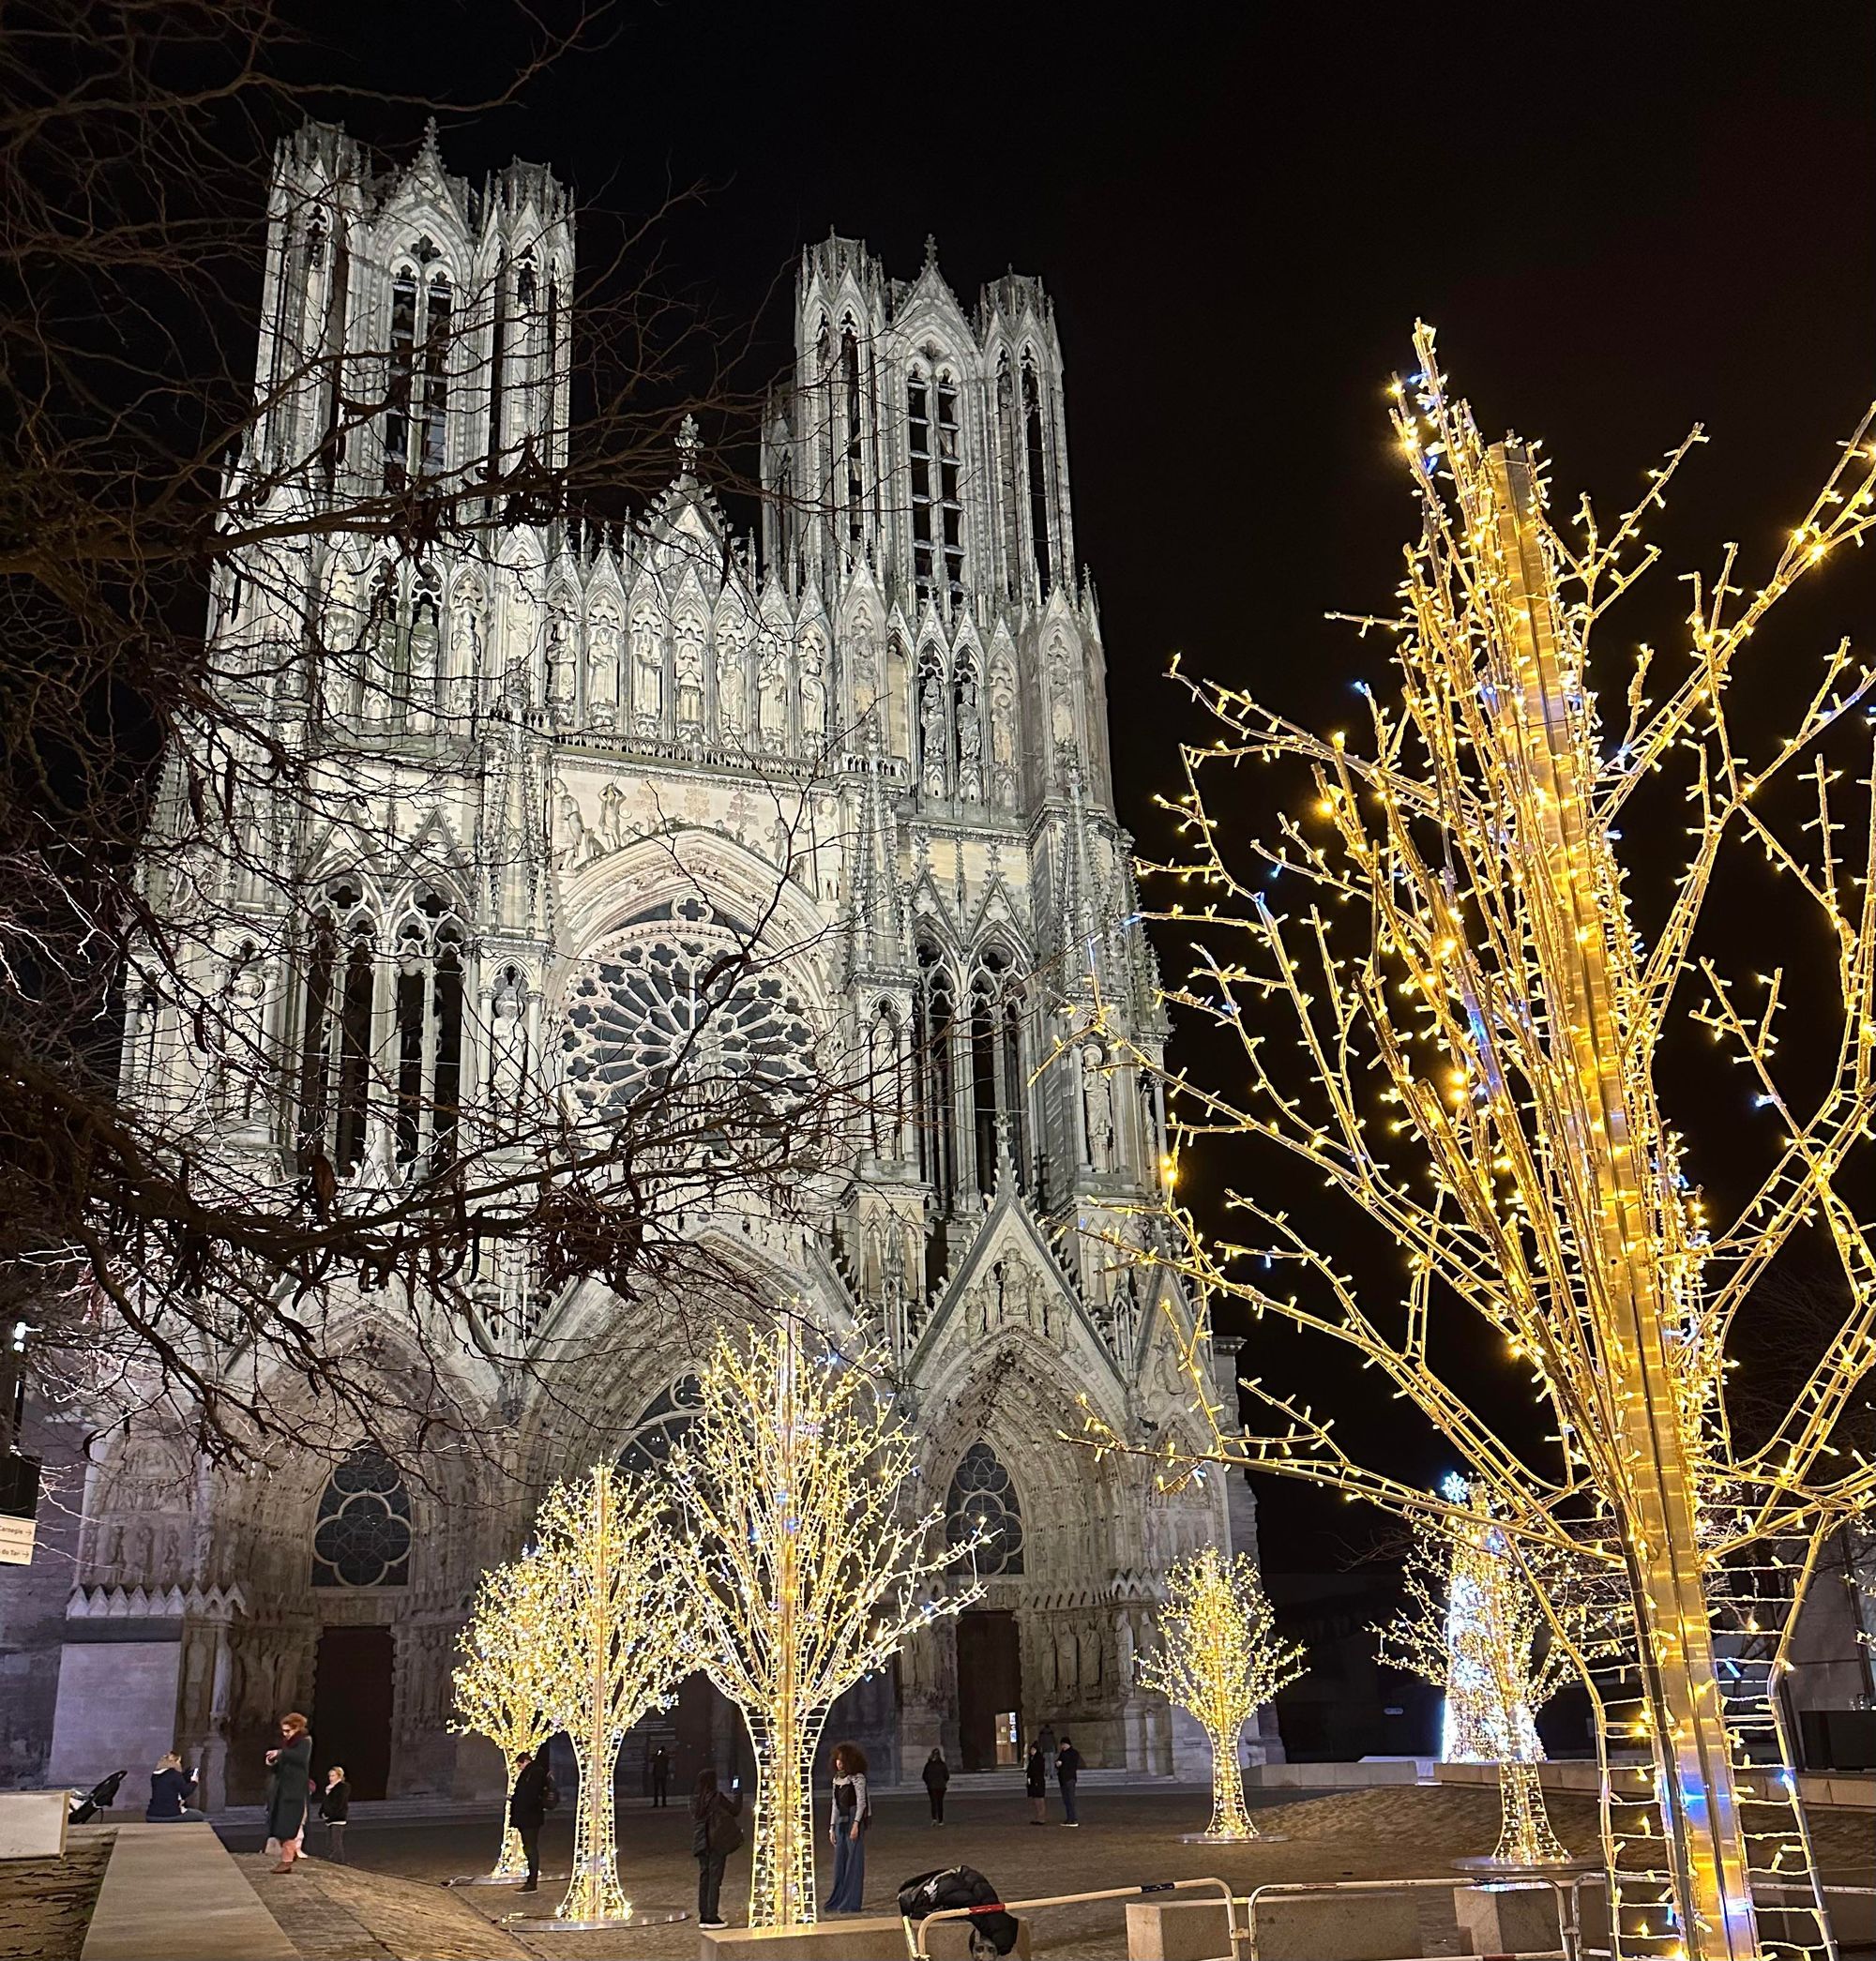 2nd Sunday in Advent: December Delight and Nöel à Reims